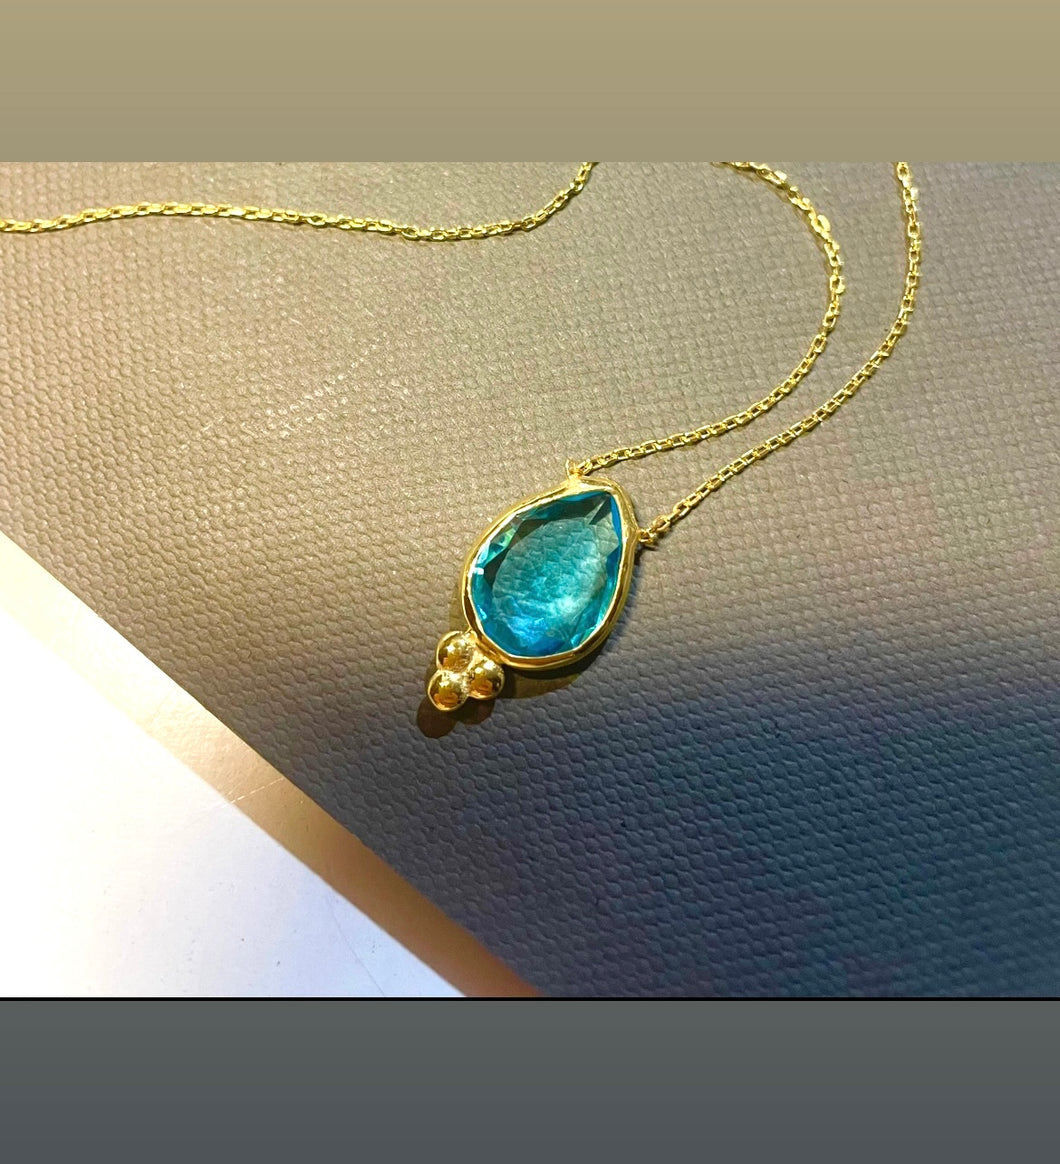 925 sterling silver necklace with gem stones and 24k gold plated 2cm-1cm